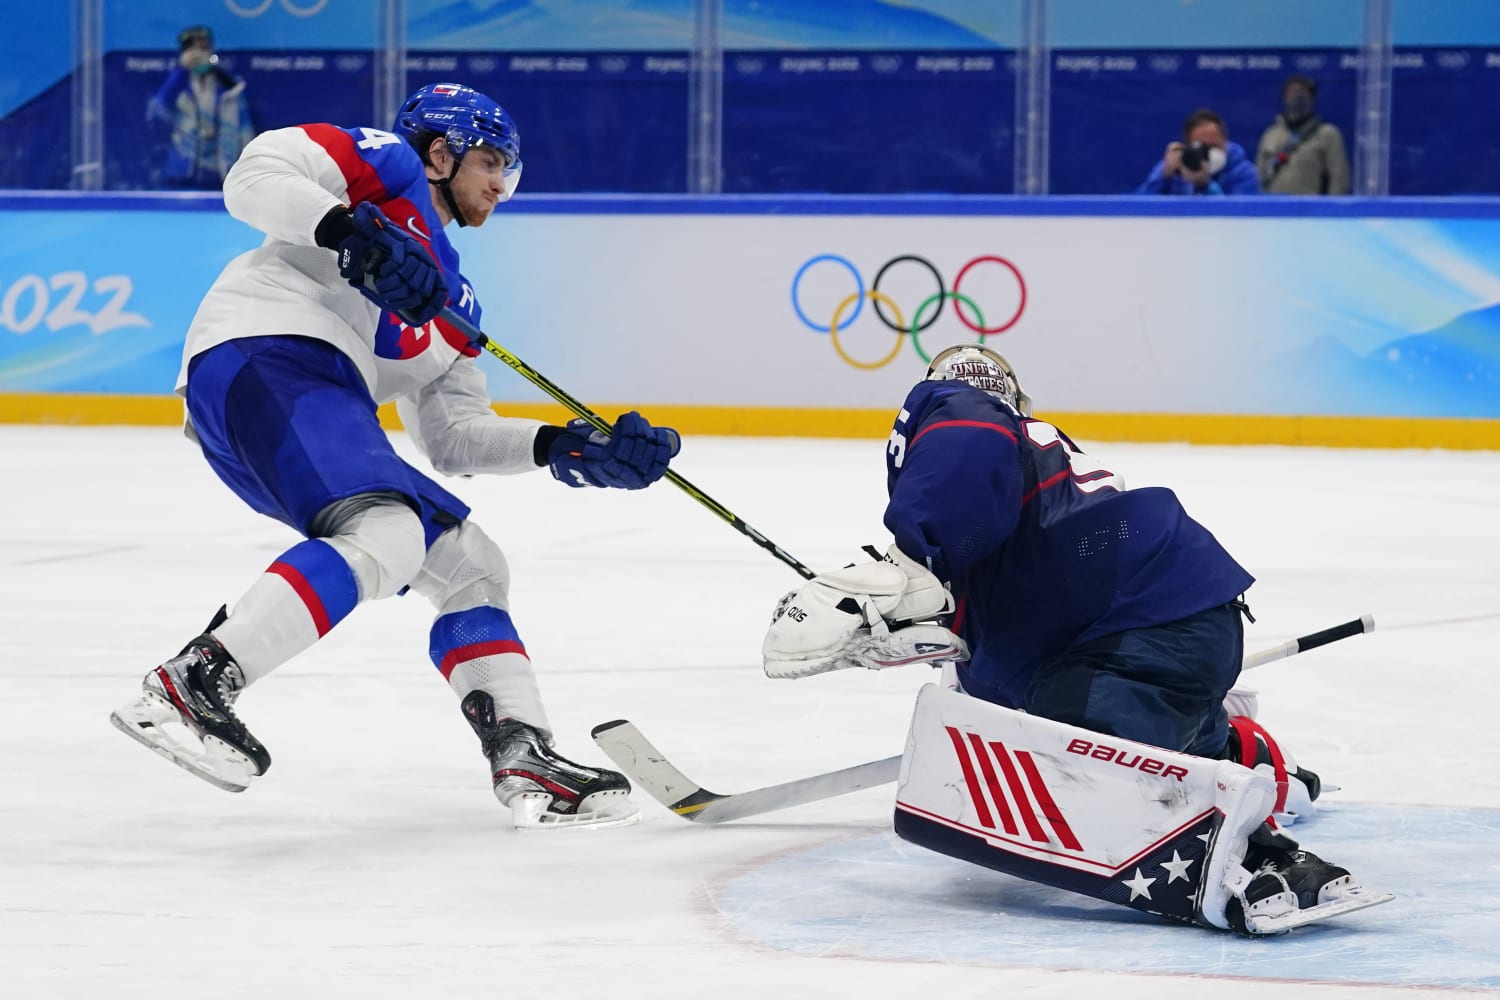 2022 Olympics is Strauss Mann's chance to prove he belongs in NHL